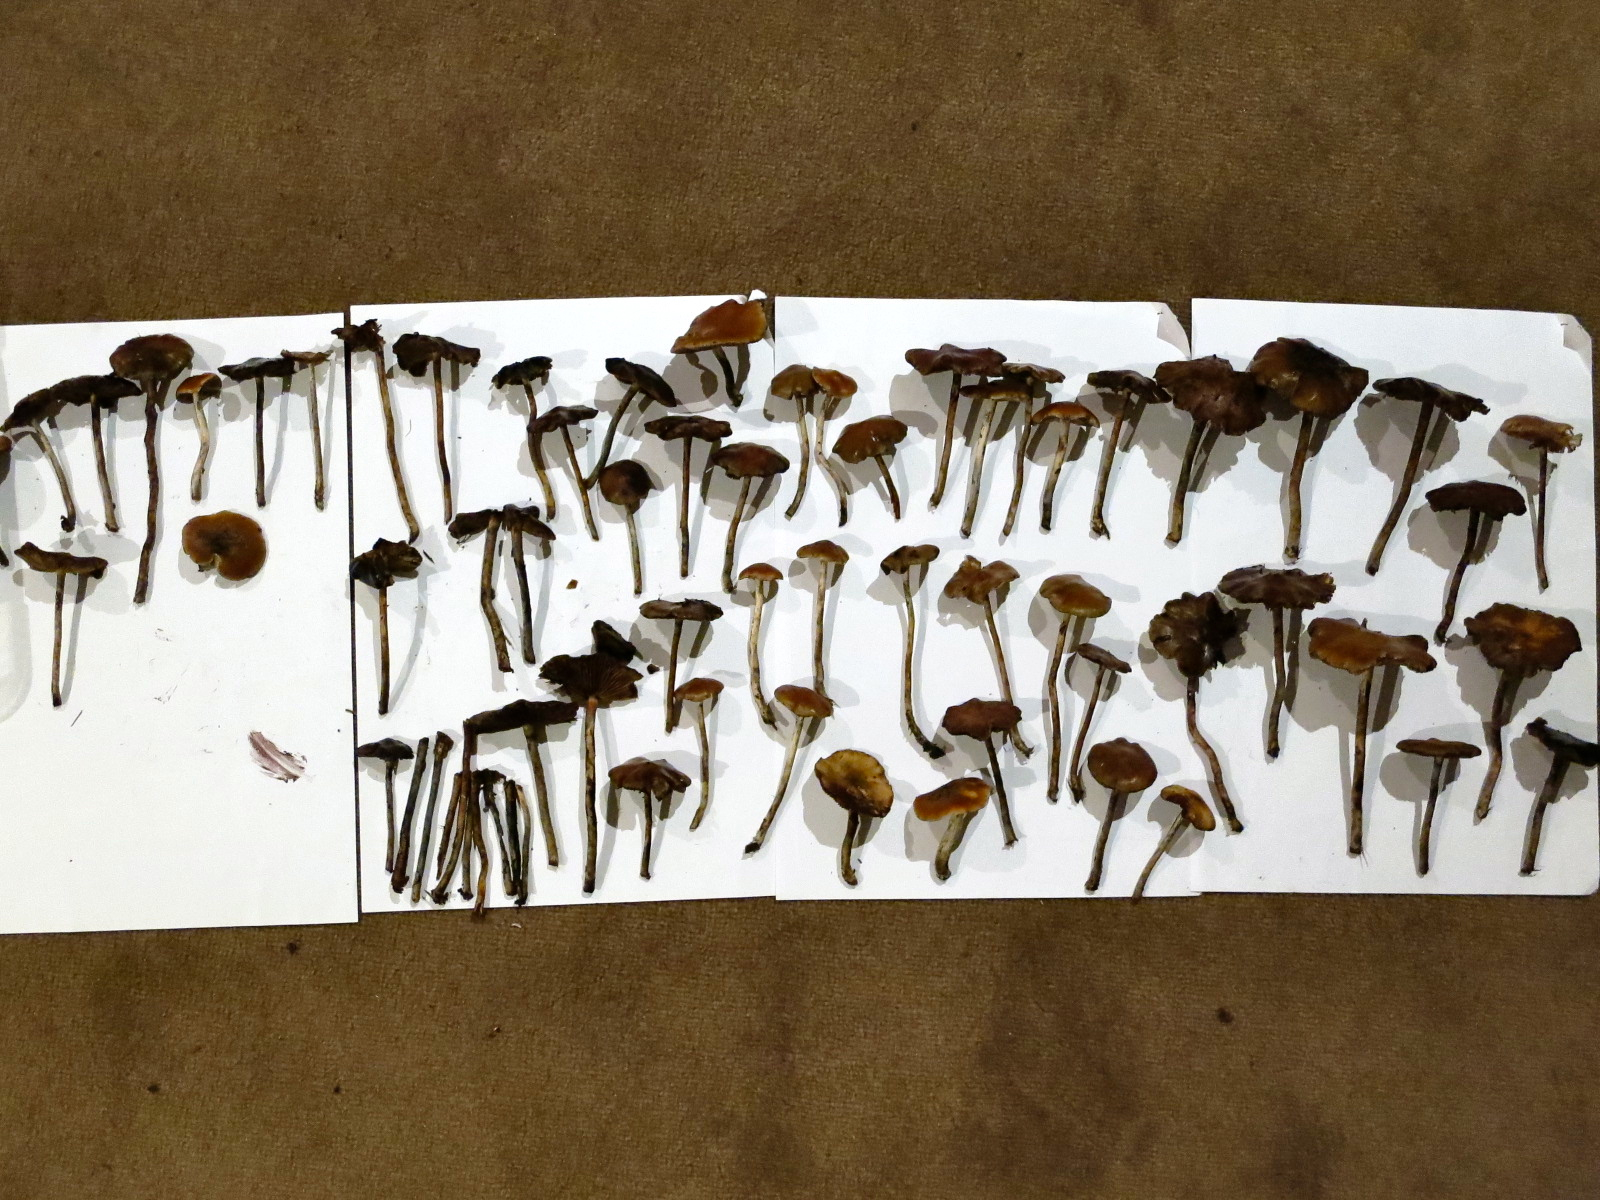 a collection of frshly picked magic mushrooms on a white piece of paper